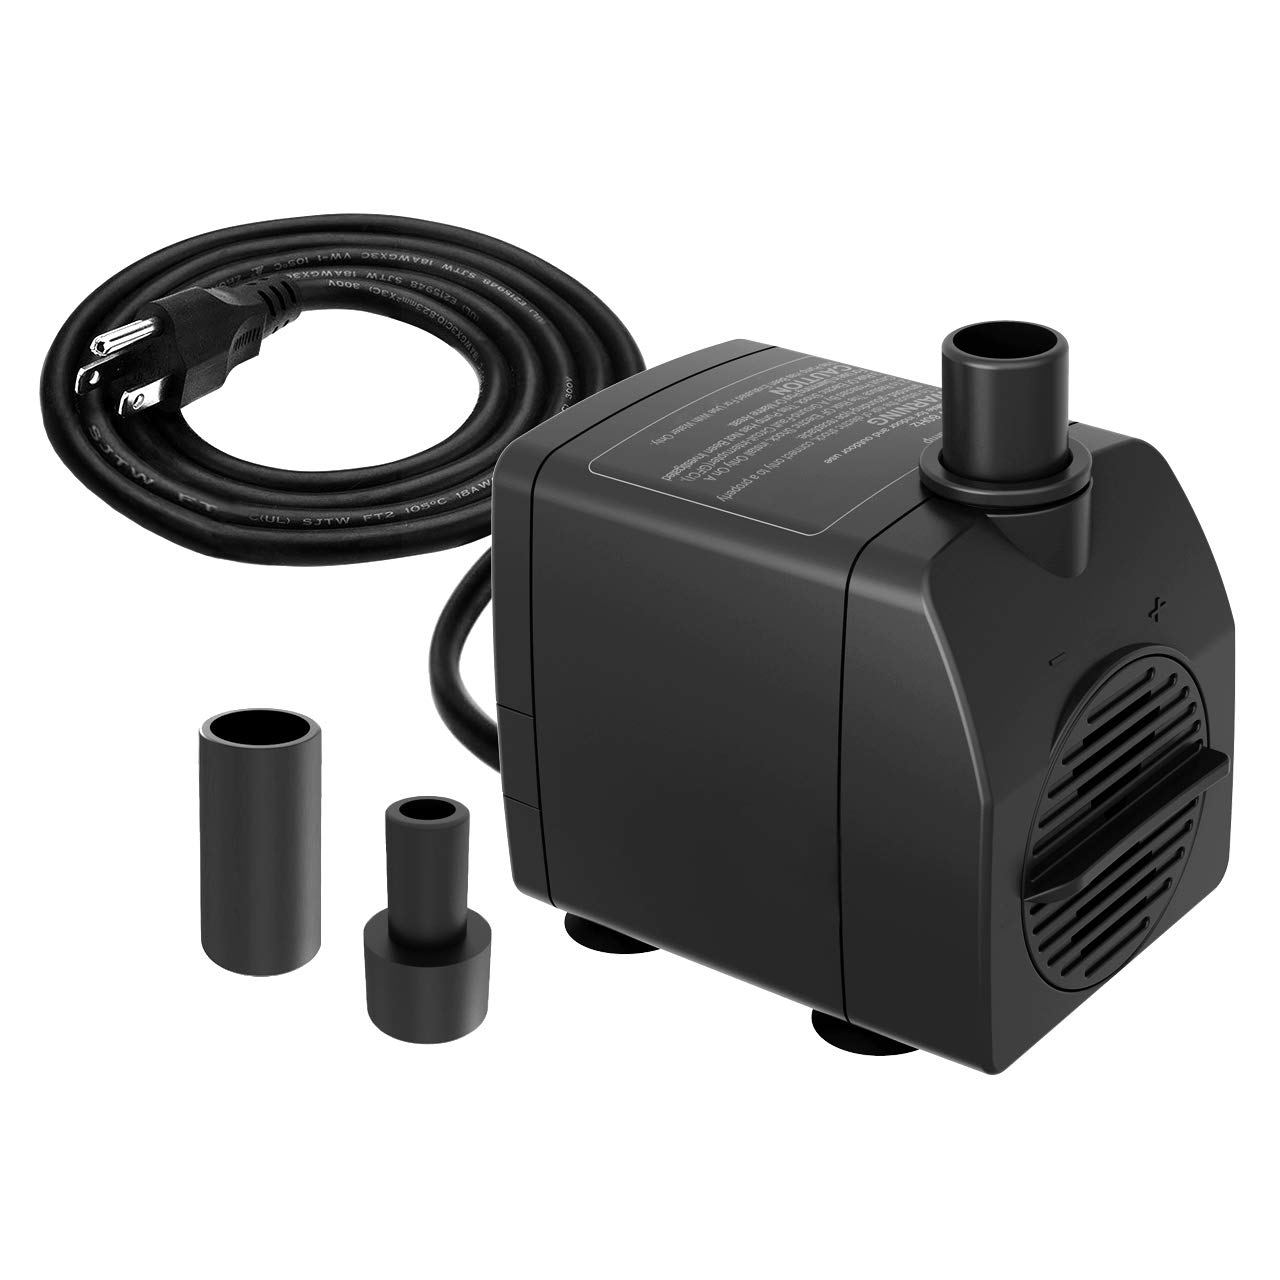 Knifel Submersible Pump 200Gph Ultra Quiet With Dry Burning Protection 52Ft High Lift For Fountains, Hydroponics, Ponds, Aquariu